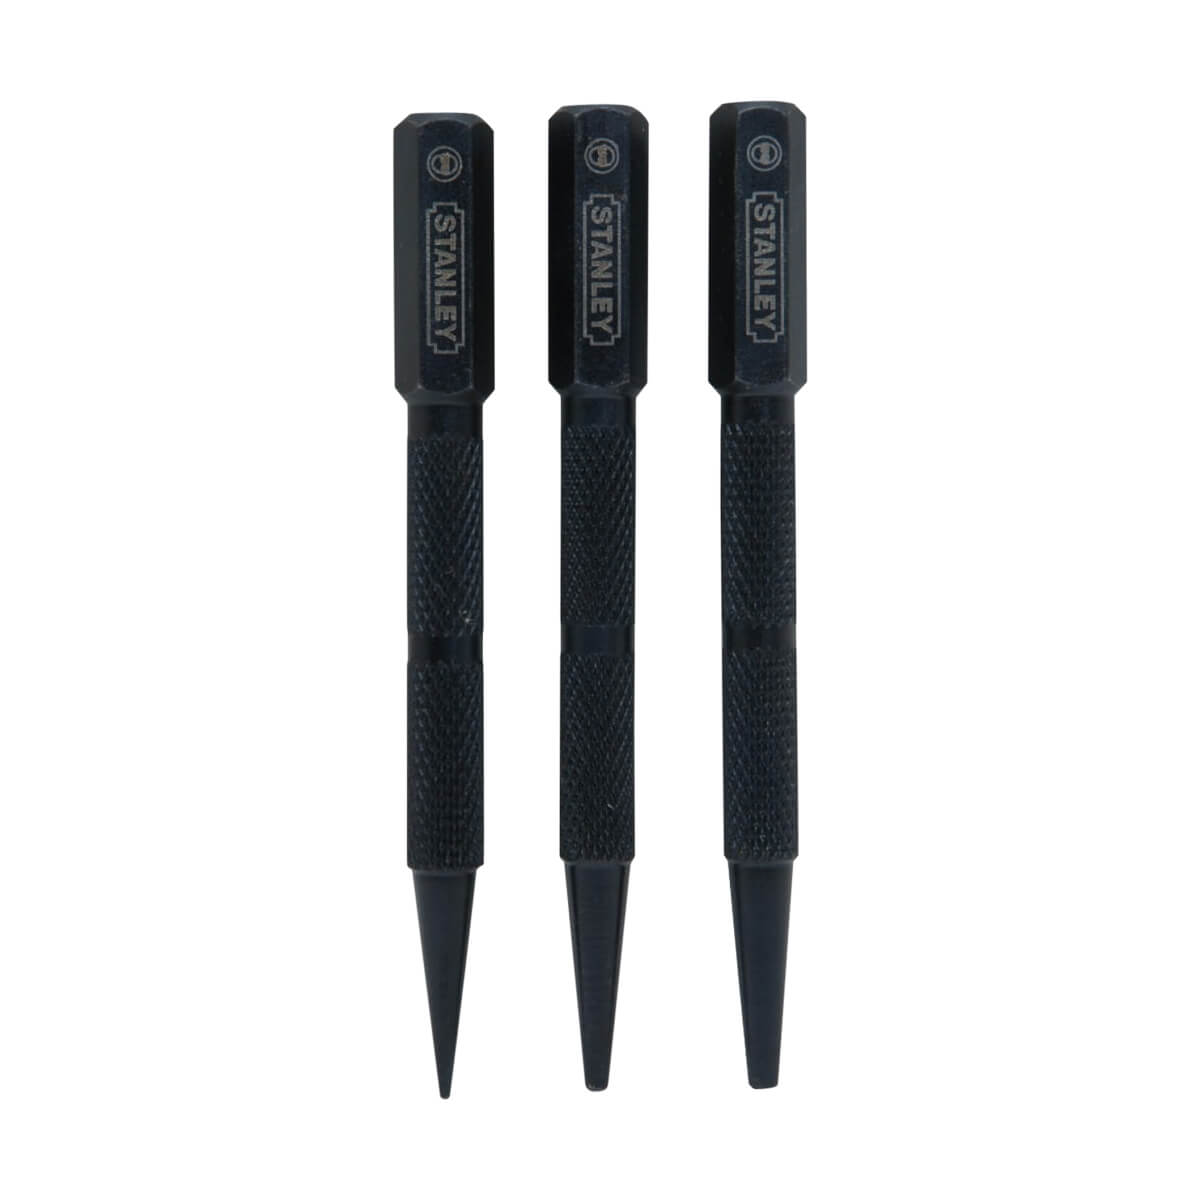 Stanley Assorted Square Head Nail Set - 3 Piece Set